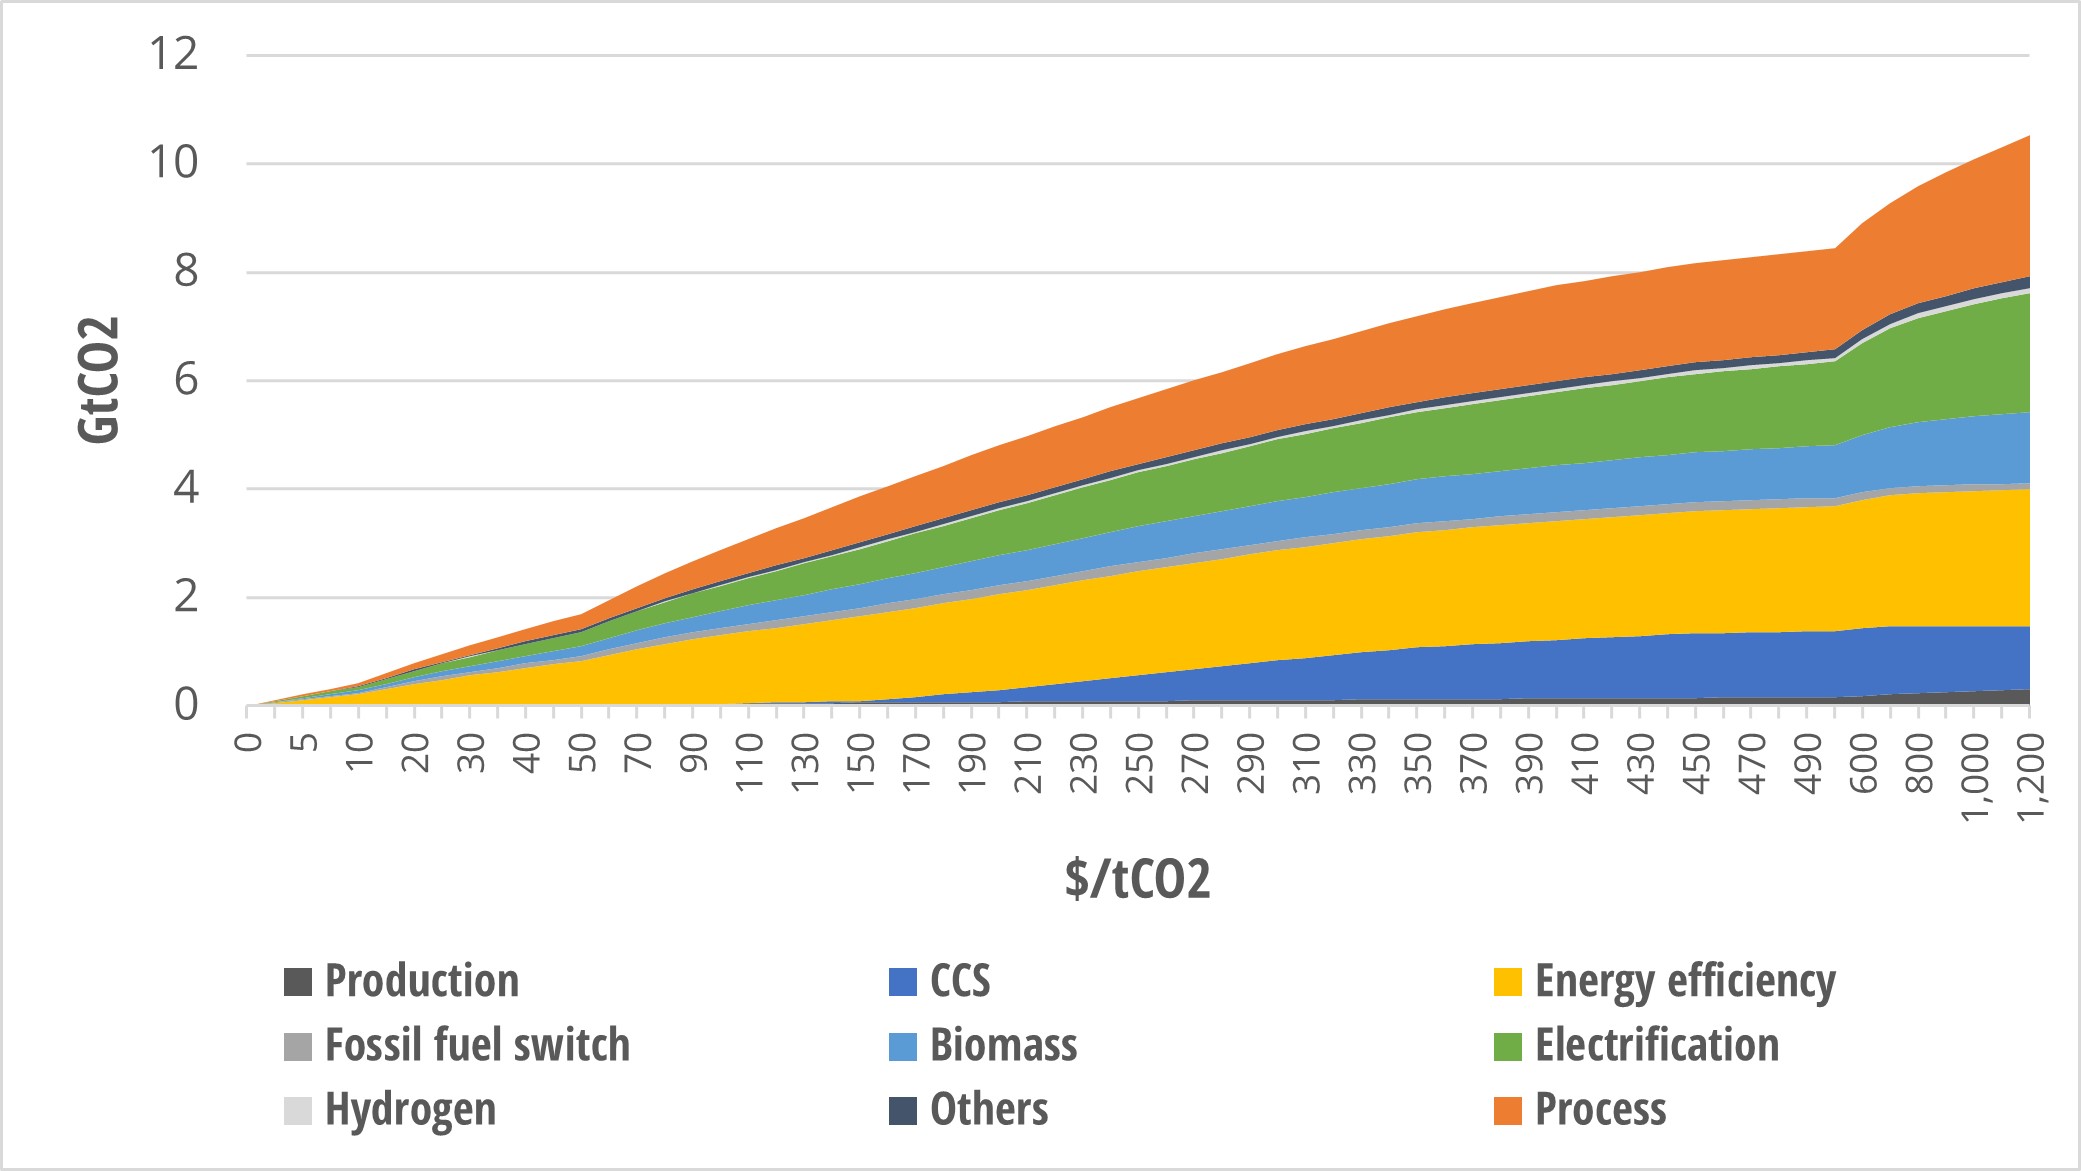 CO2 abatement by option in the industry in the “progressive policy” scenario in 2050